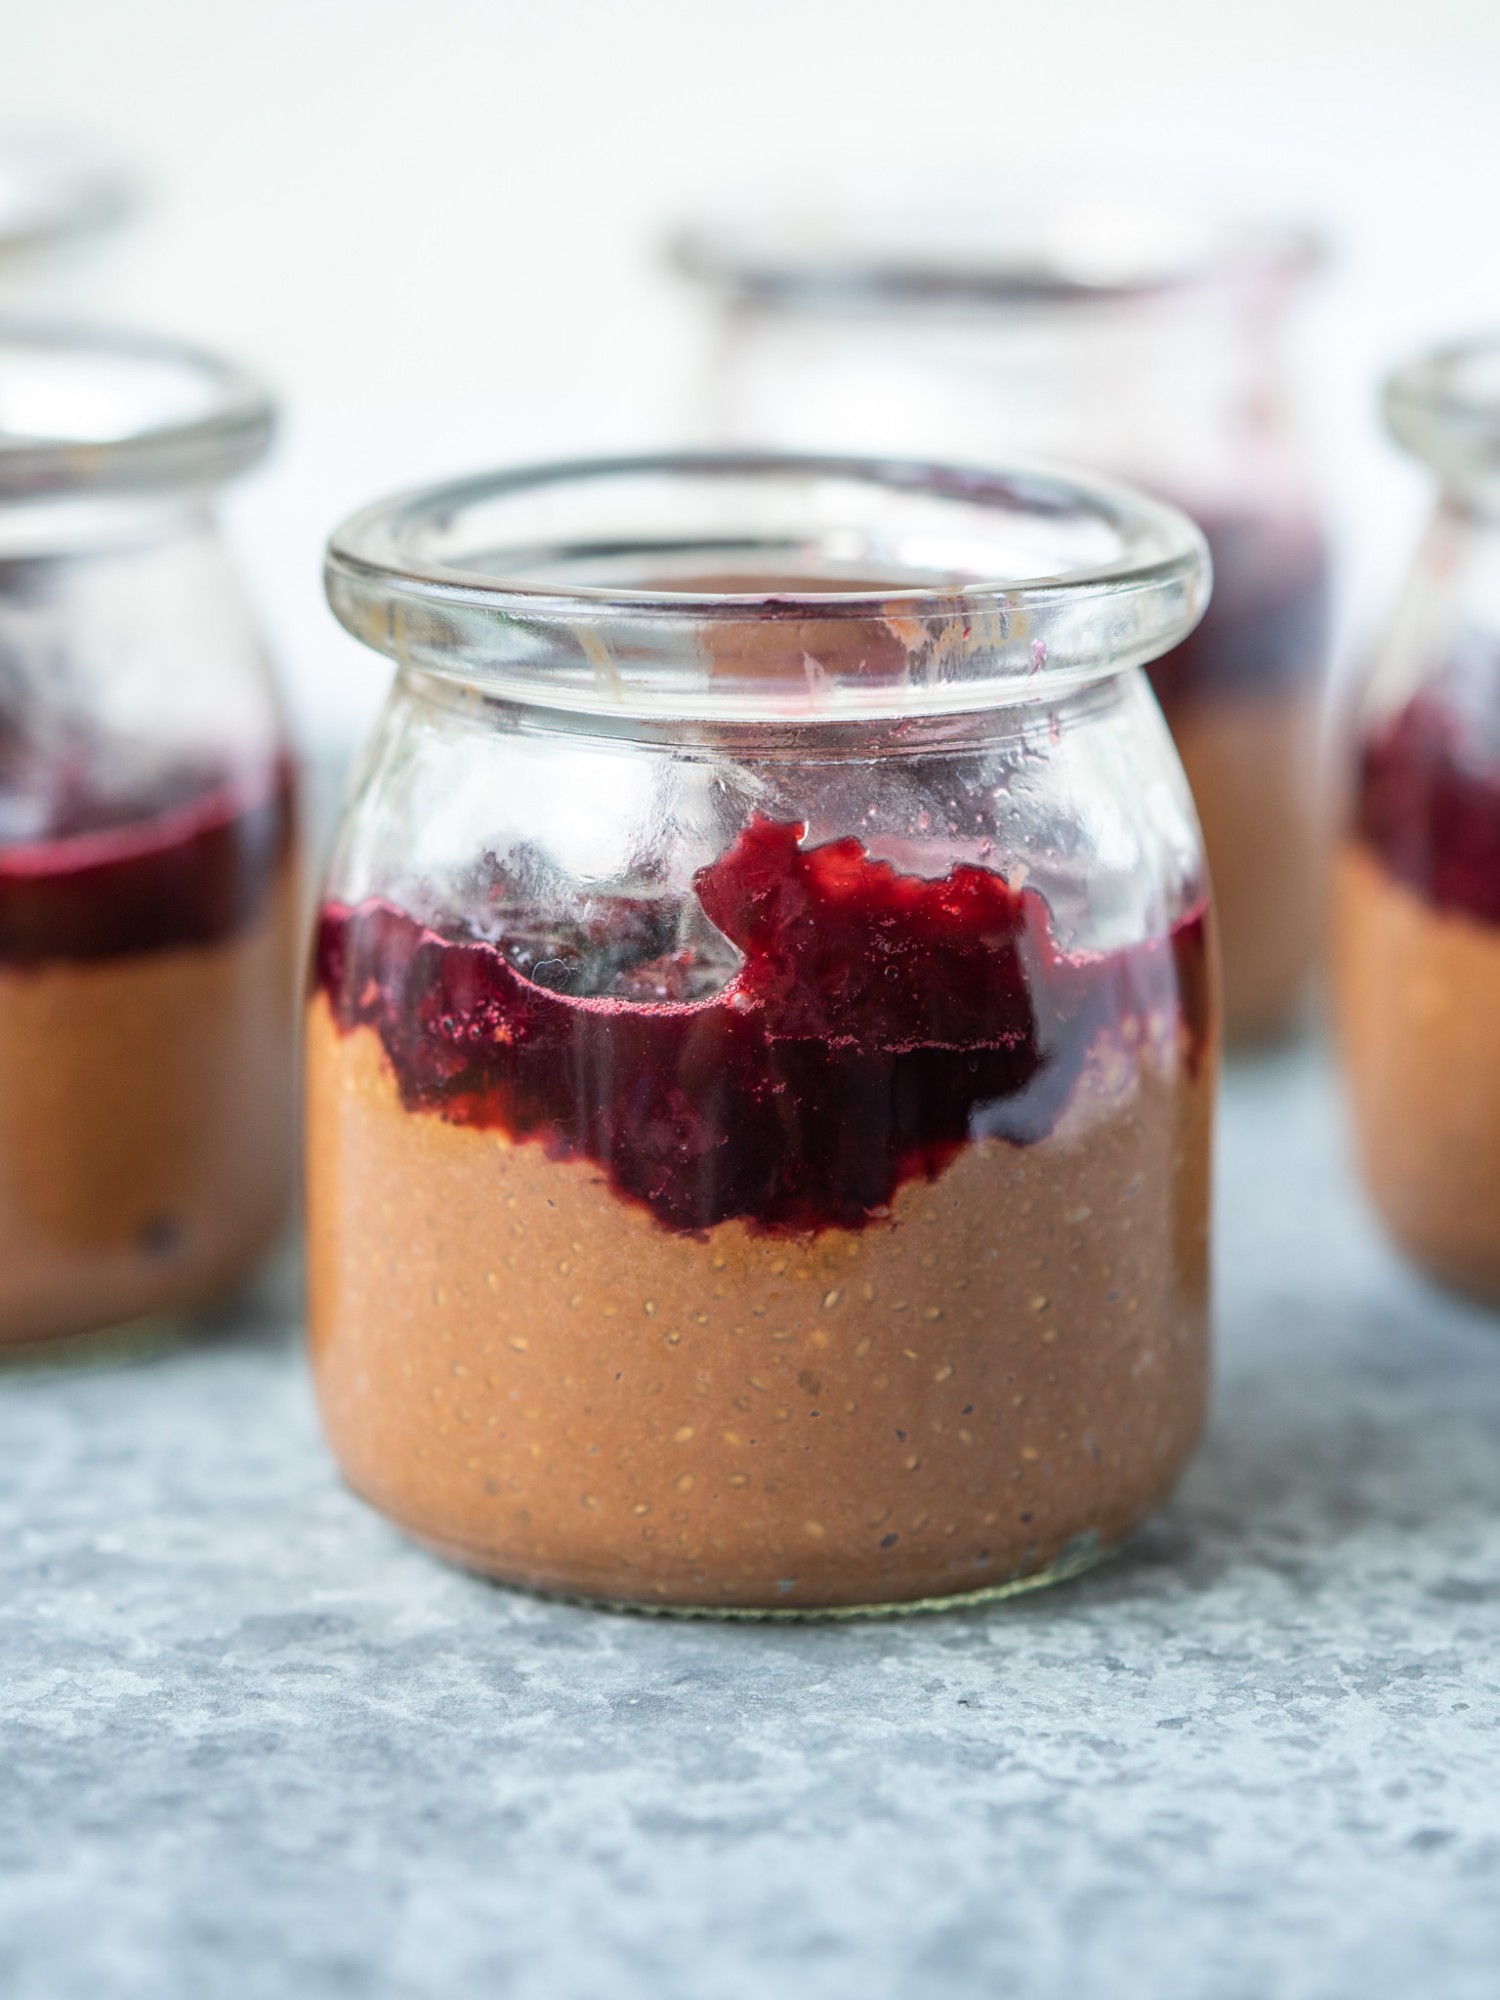 Side view of chocolate chia pudding in a glass jar with cherry compote on top